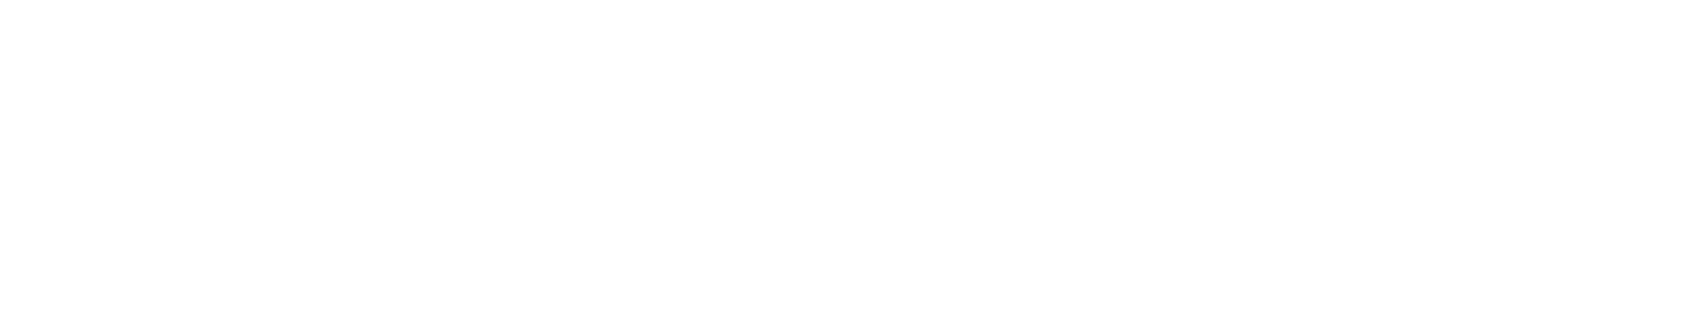 BiblioHAL official logo